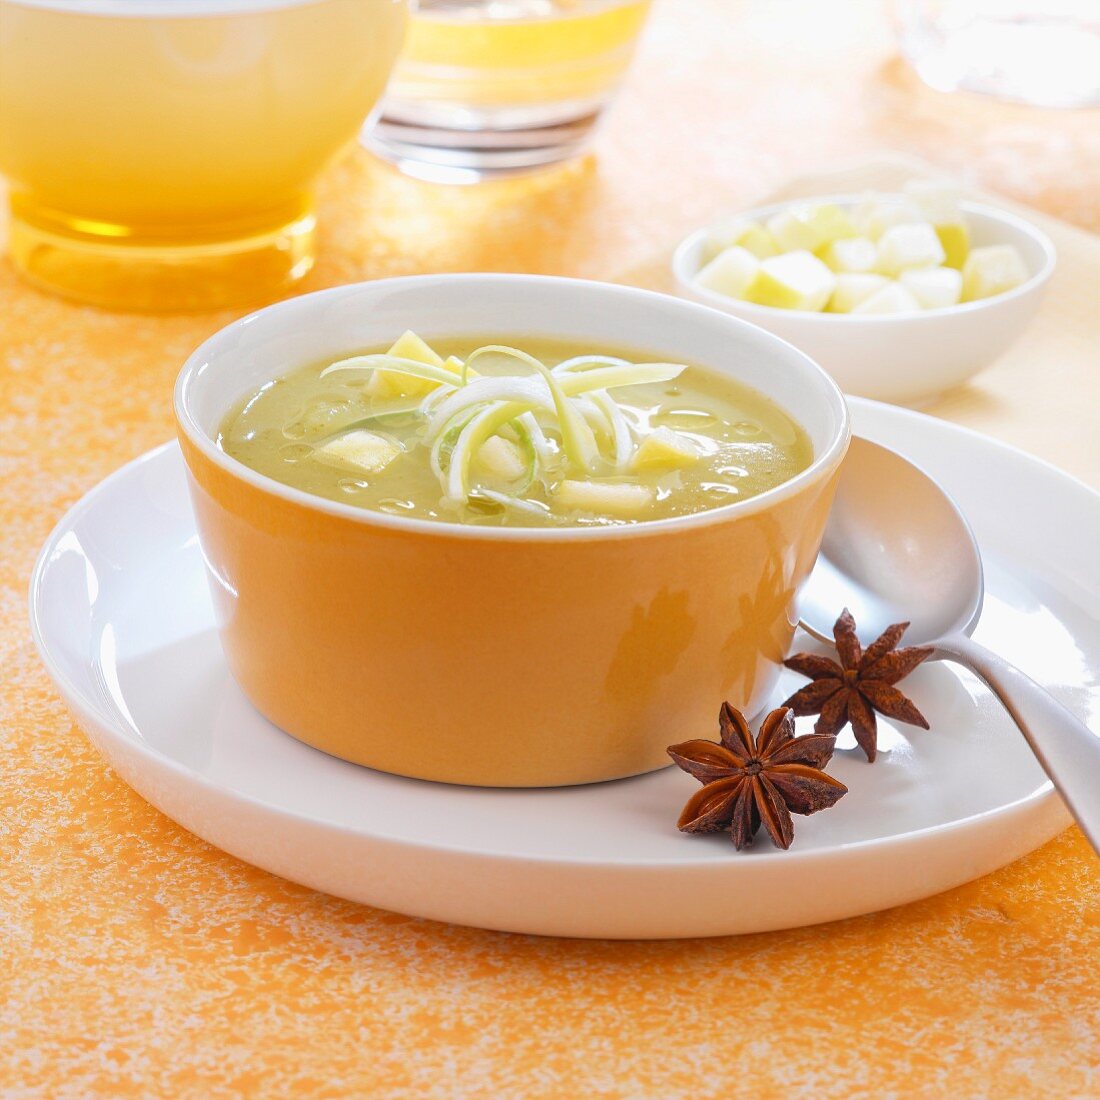 Leek, celery and apple soup with star anise